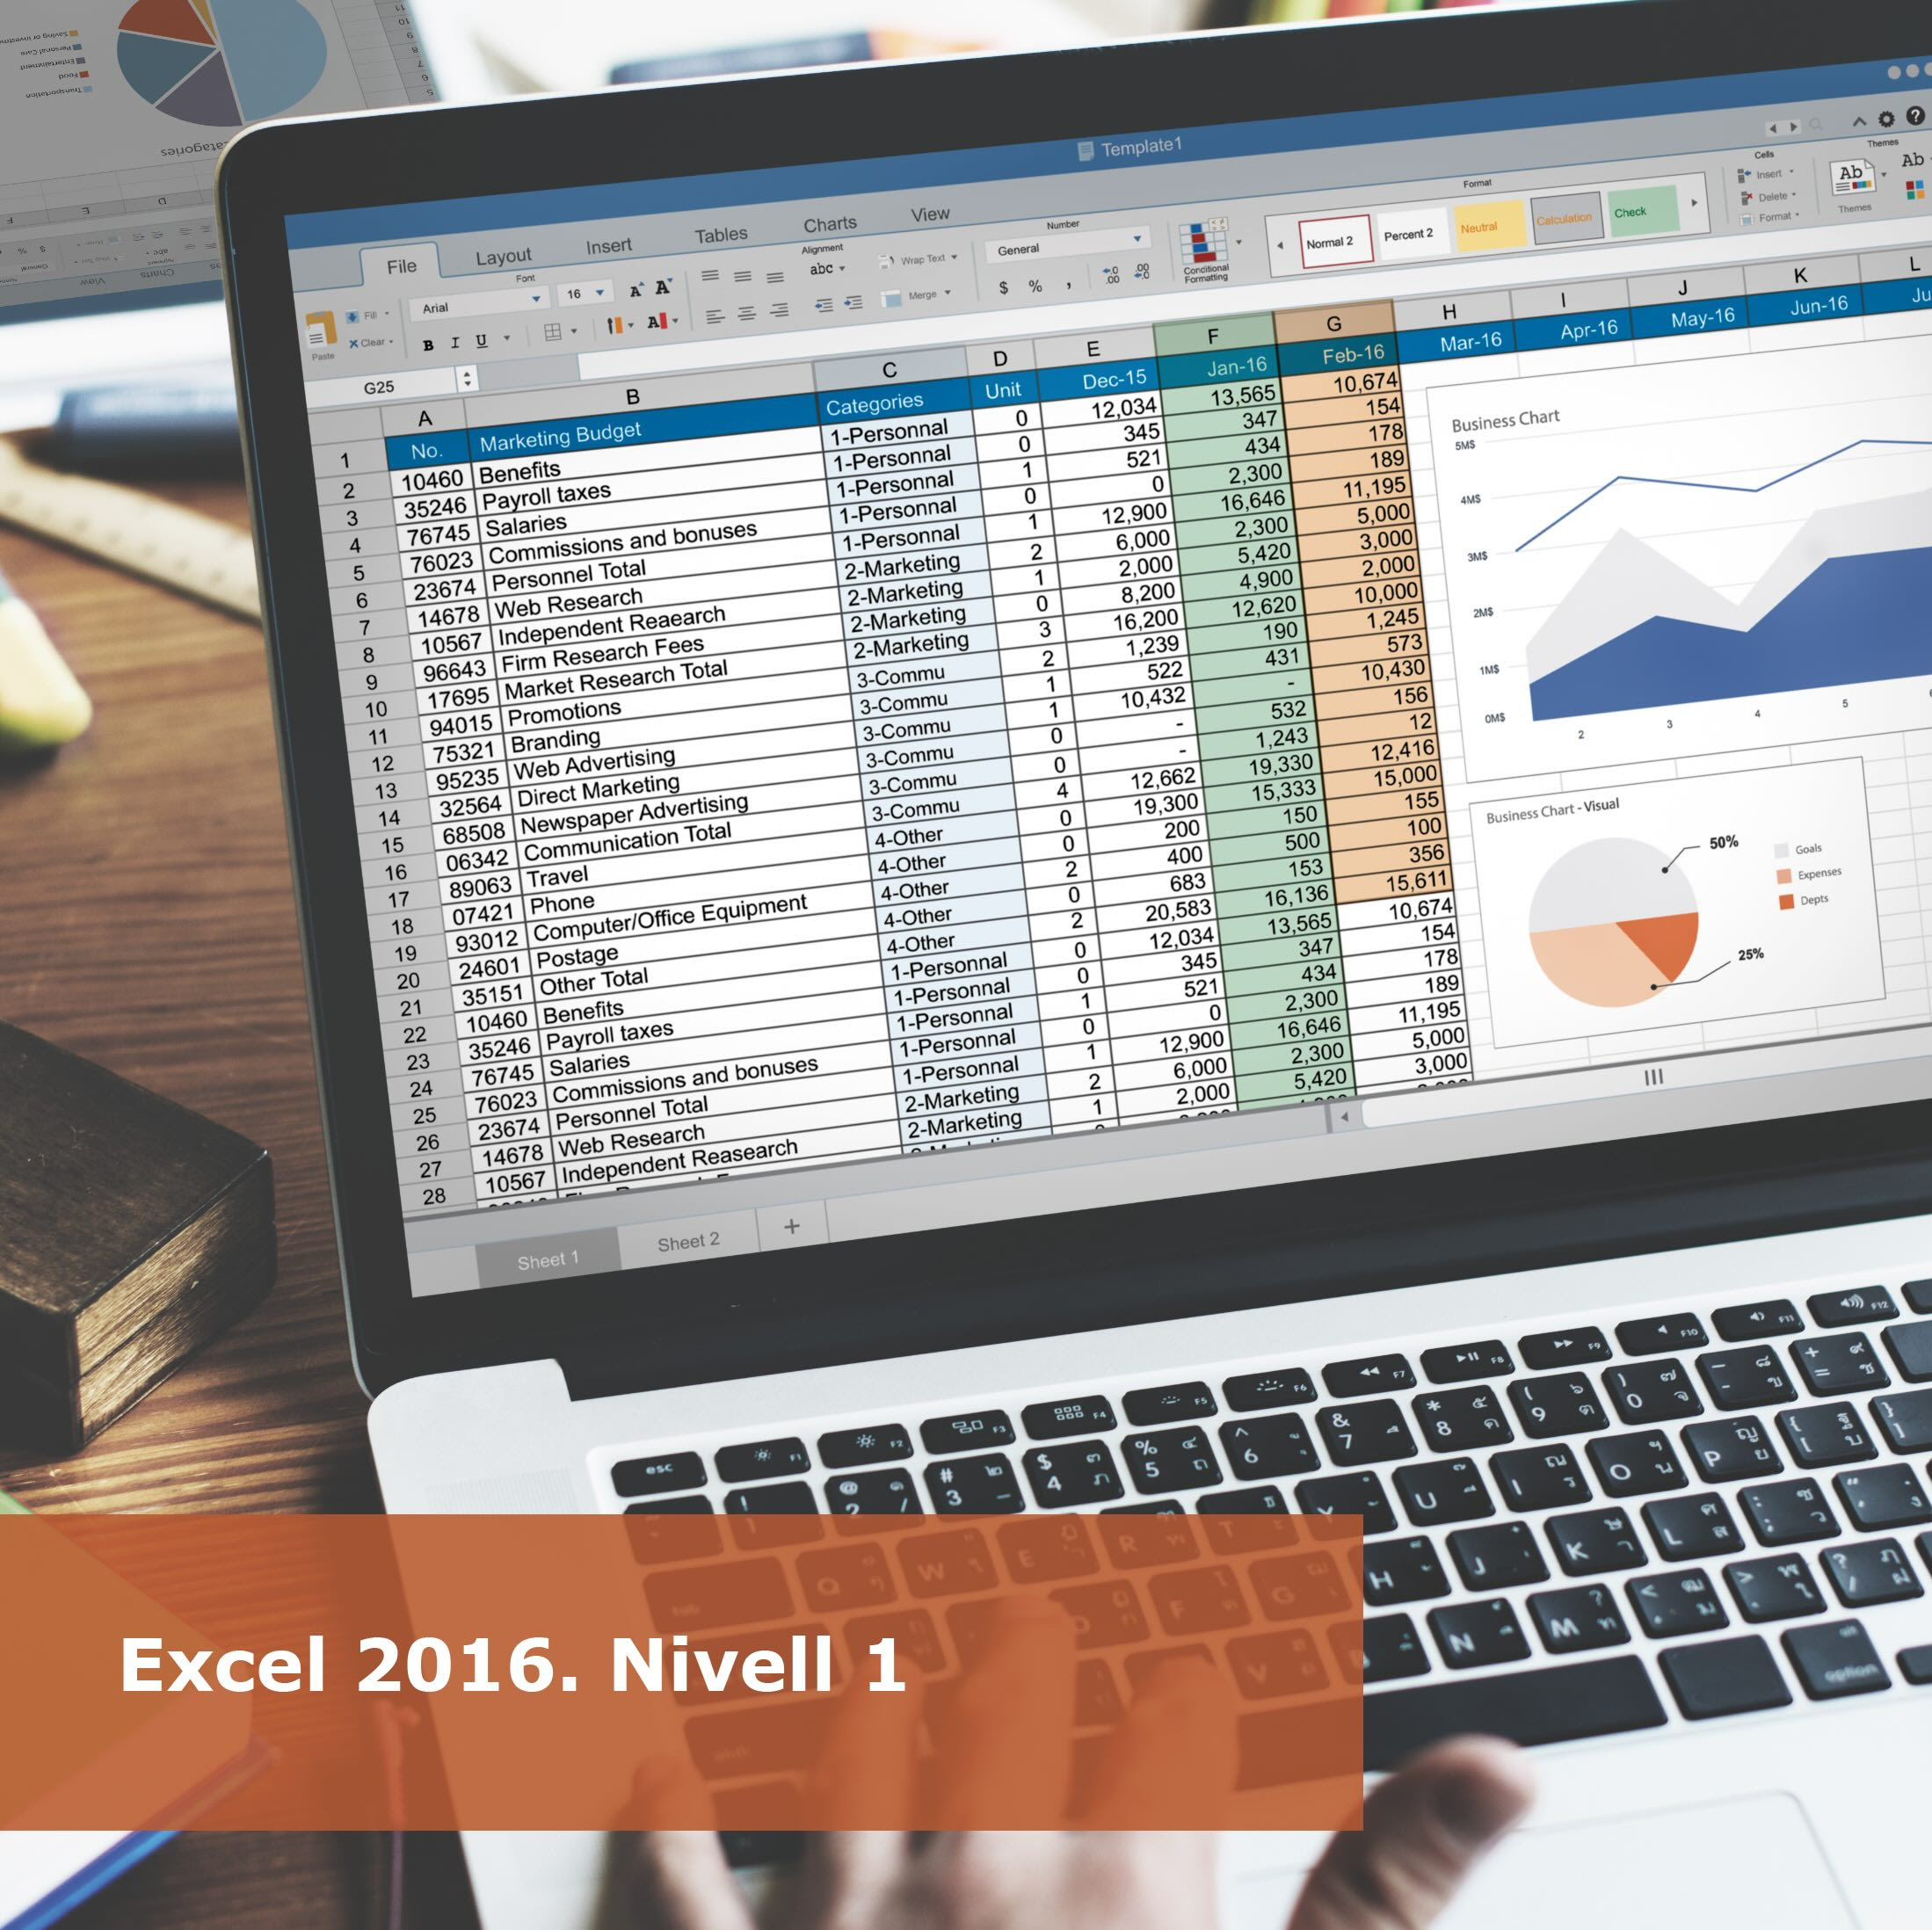 Excel 2016. Nivell 1